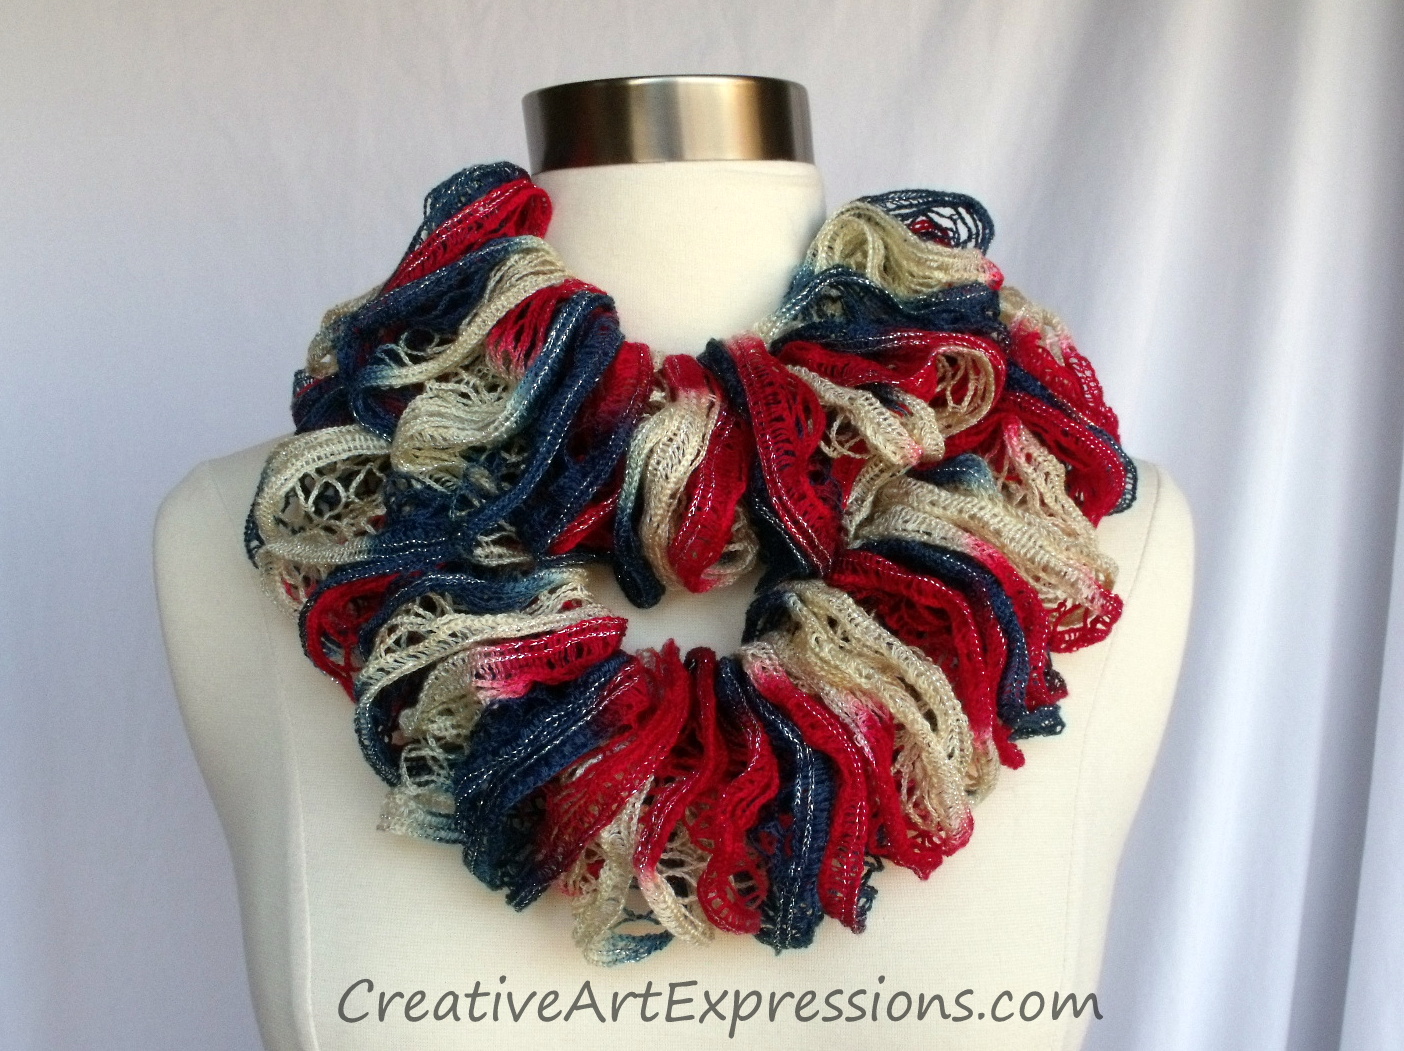 Creative Art Expressions Hand Knitted USA Ruffle Scarf